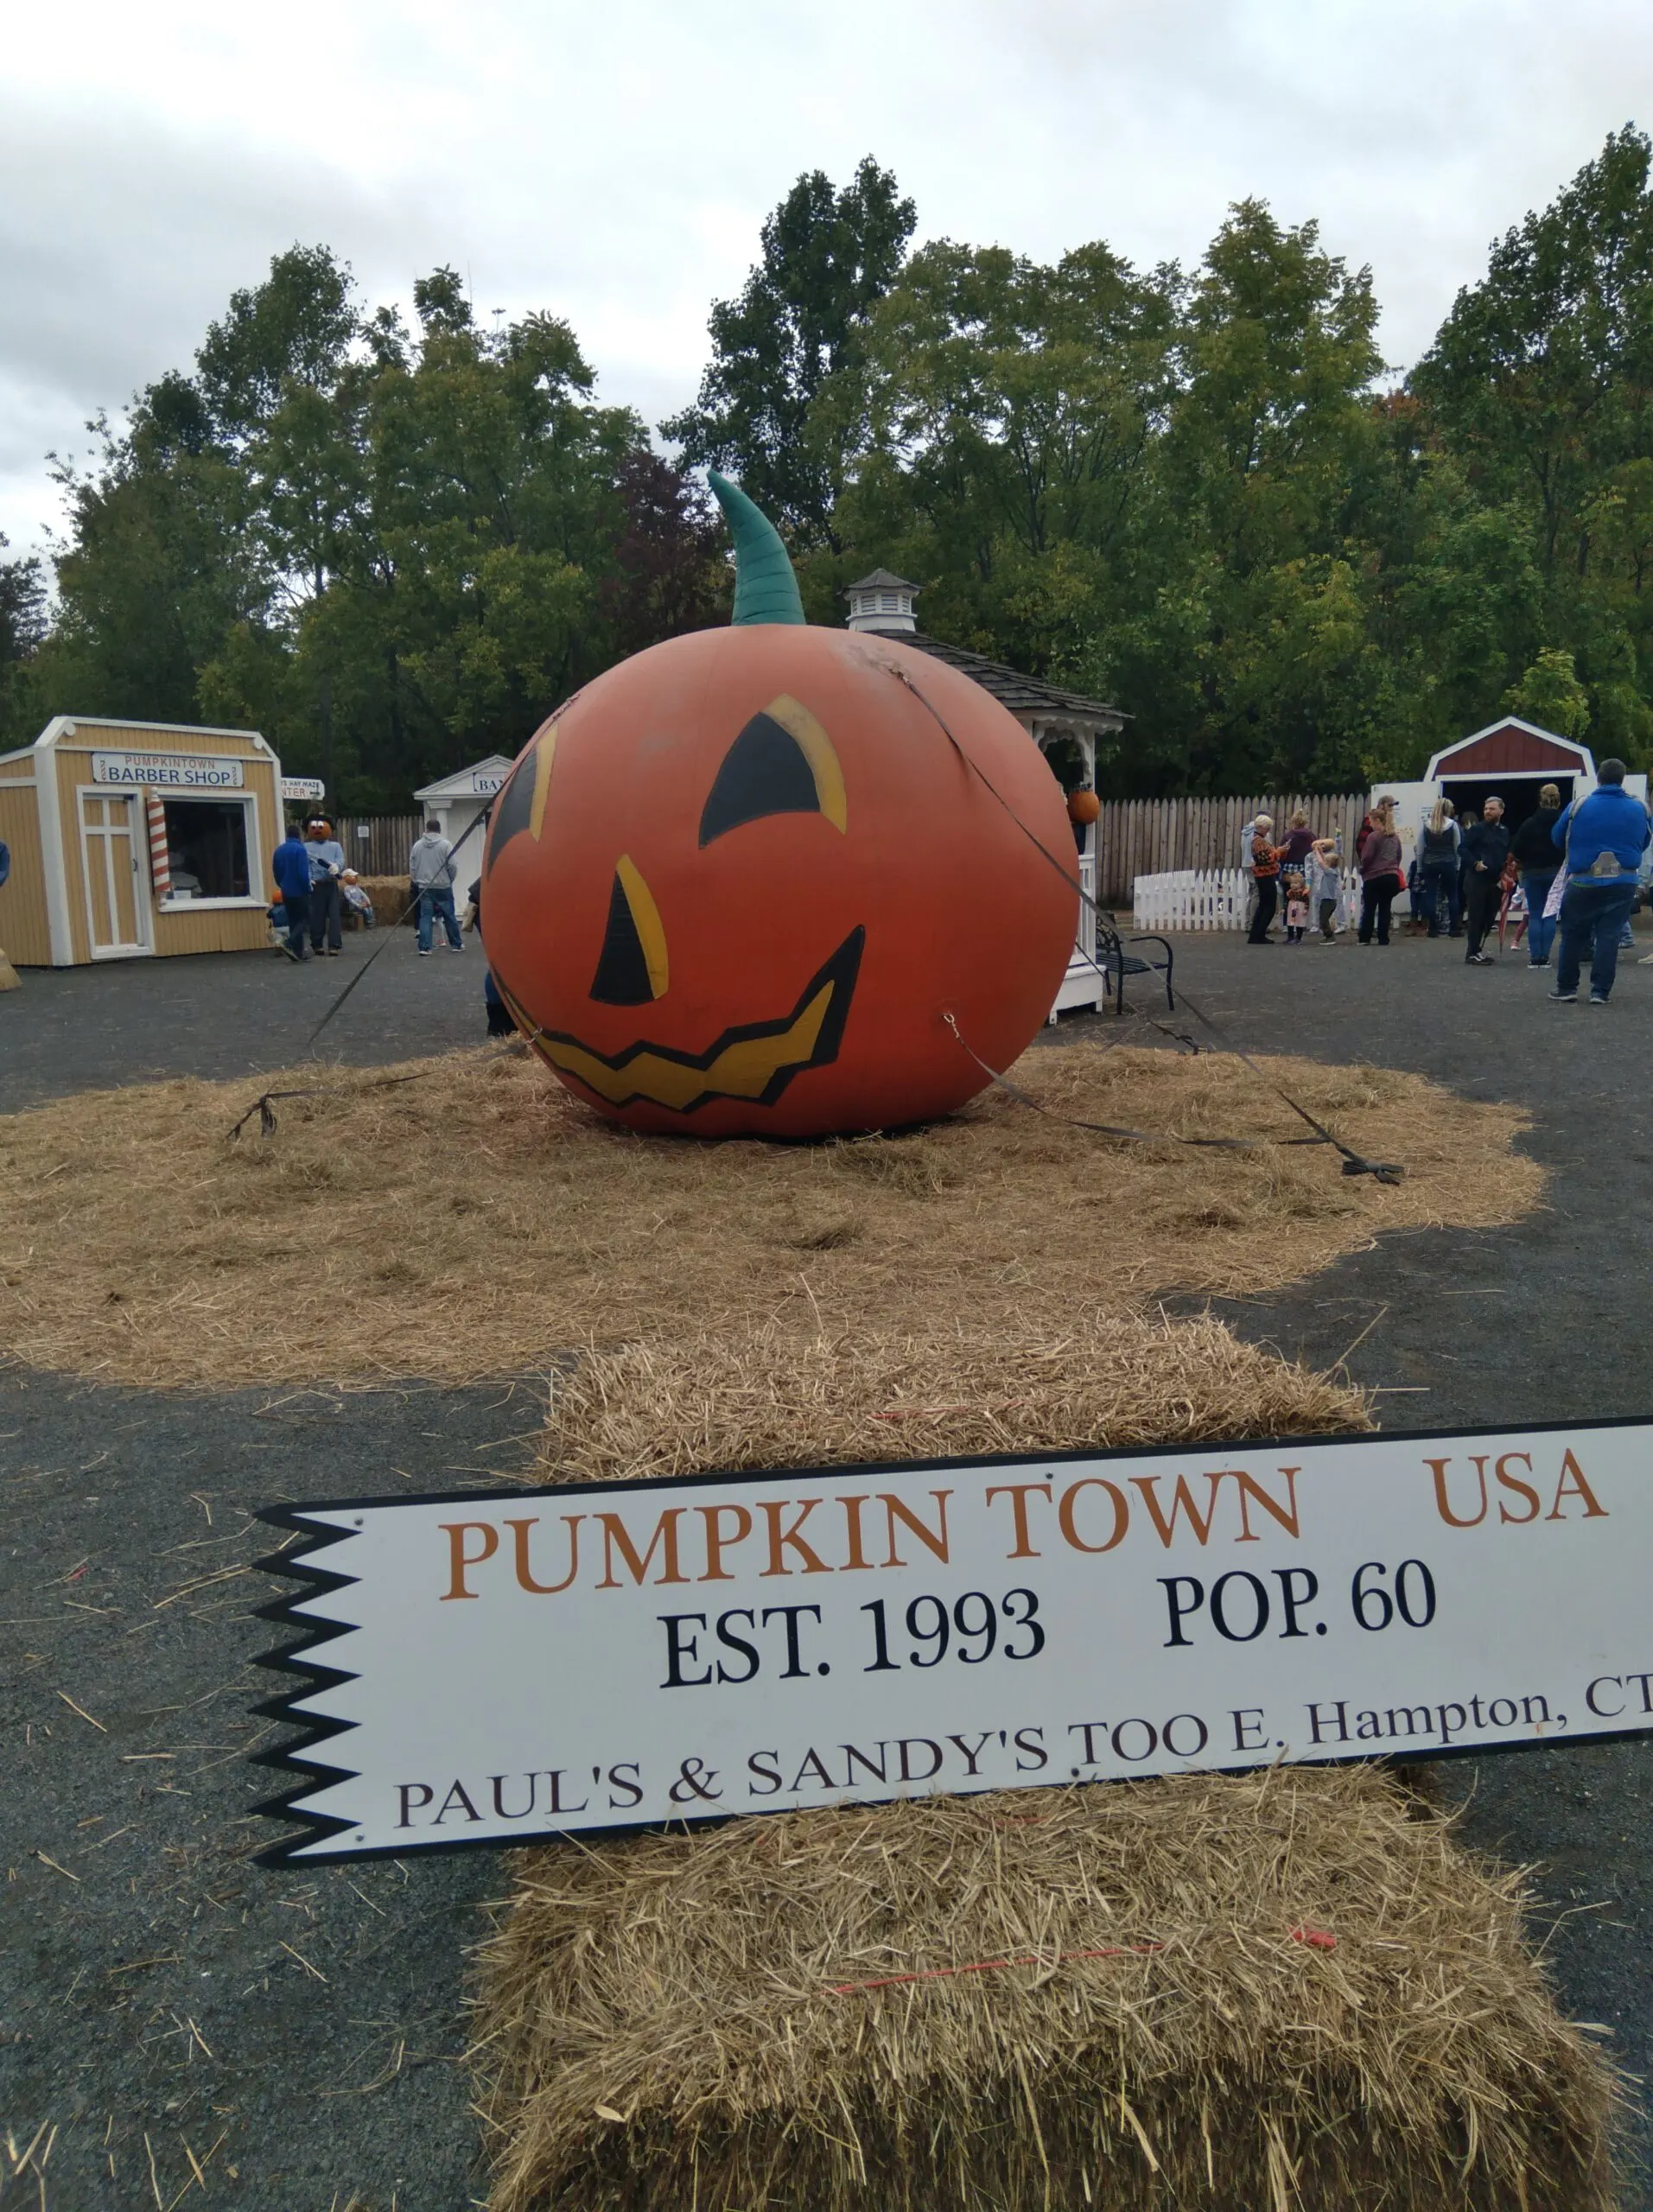 image of giant inflatable pumpkin at pumpkintown usa in east hampton ct.